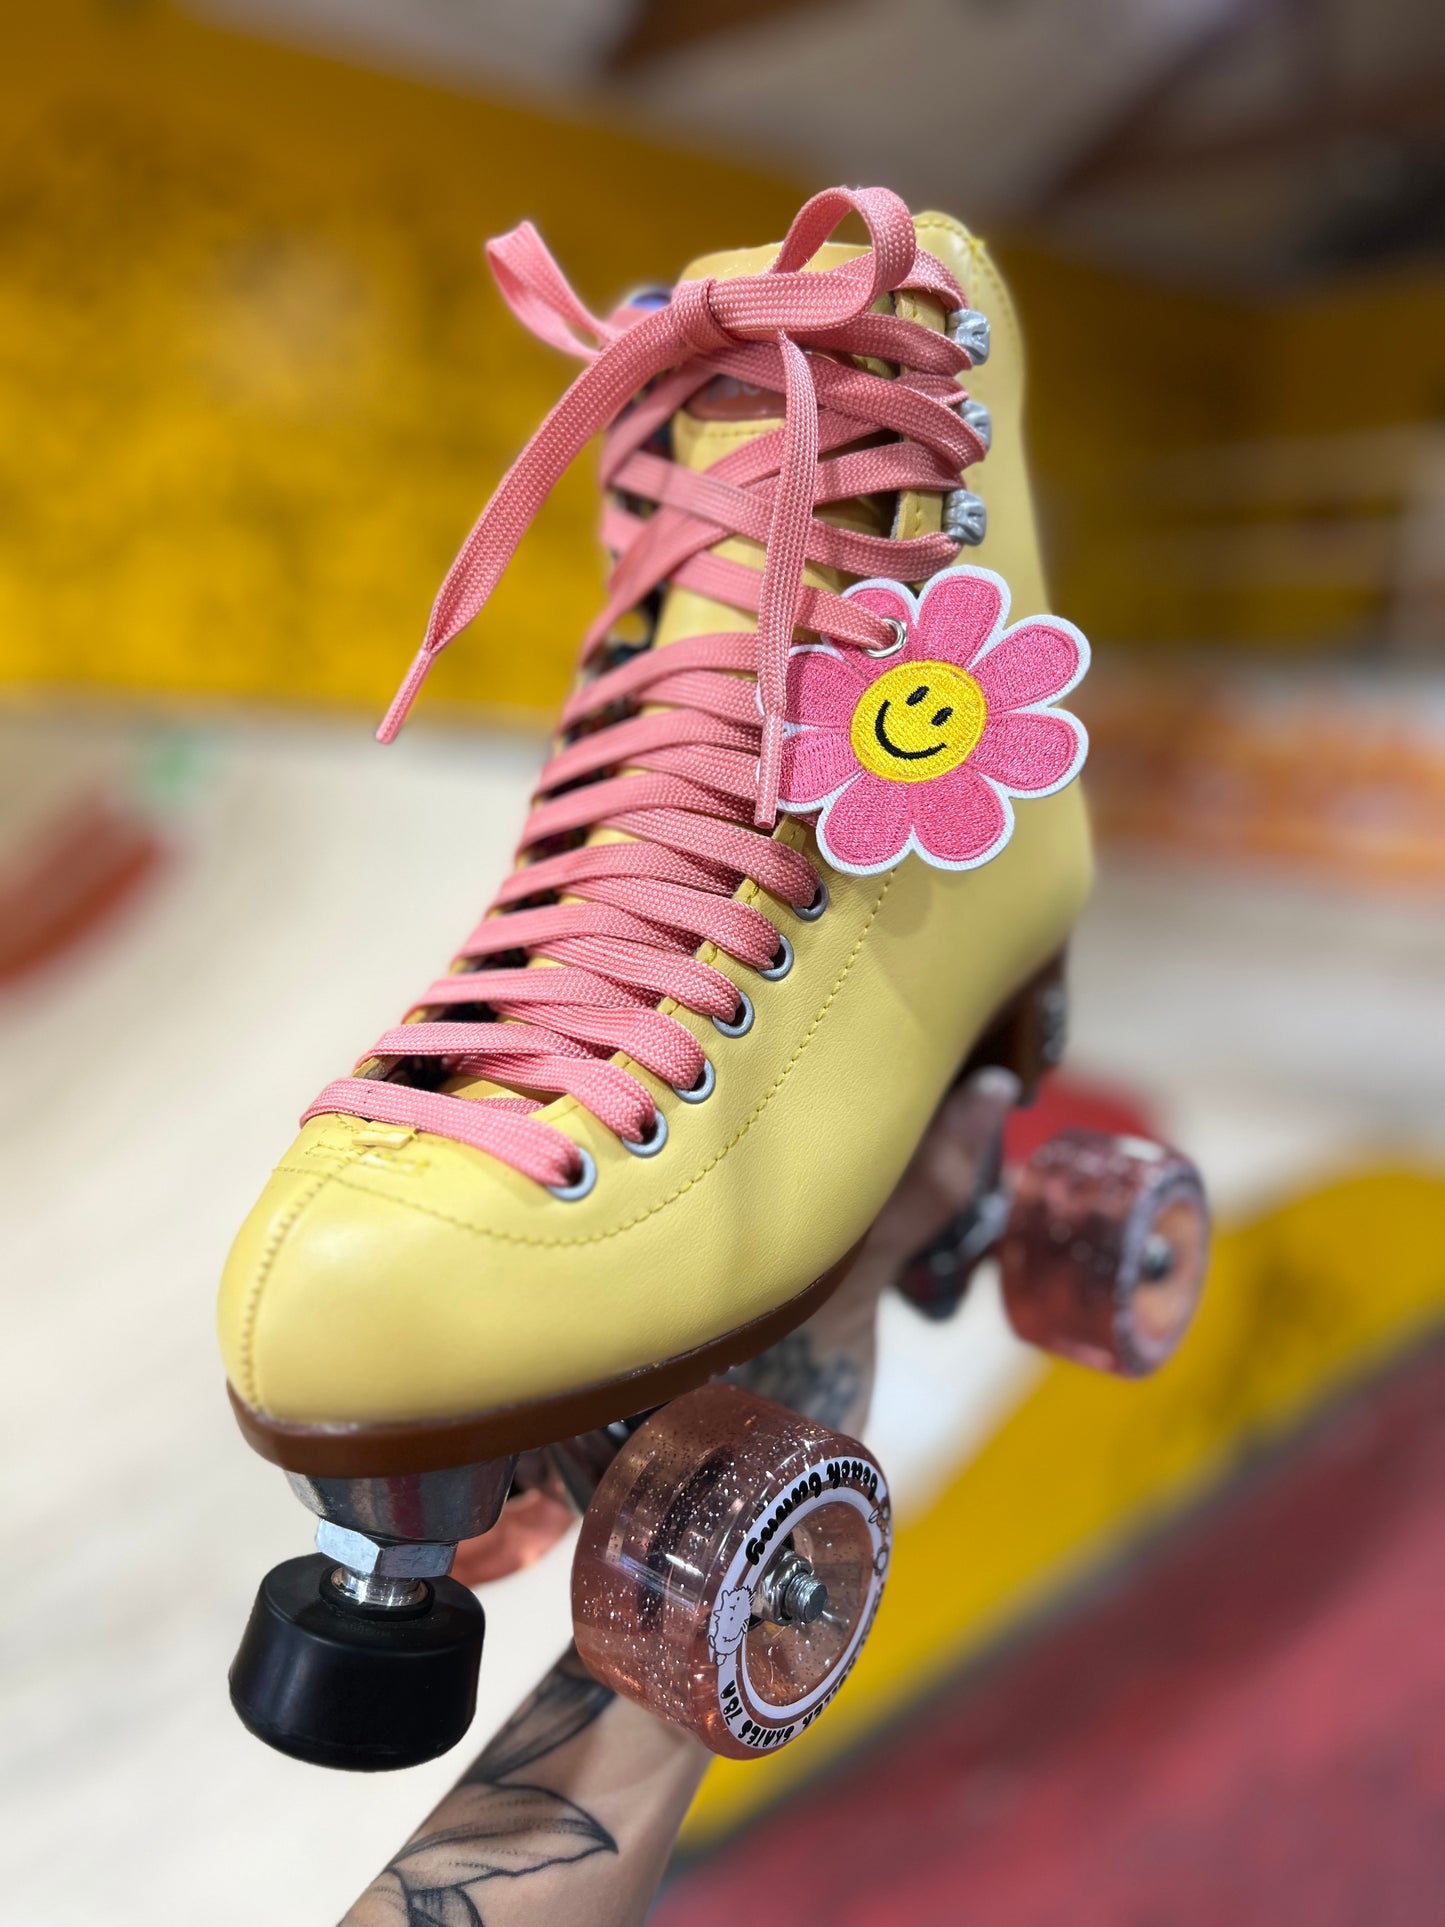 GROOVY SKATE/SHOE LACE ACCESSORY (1)